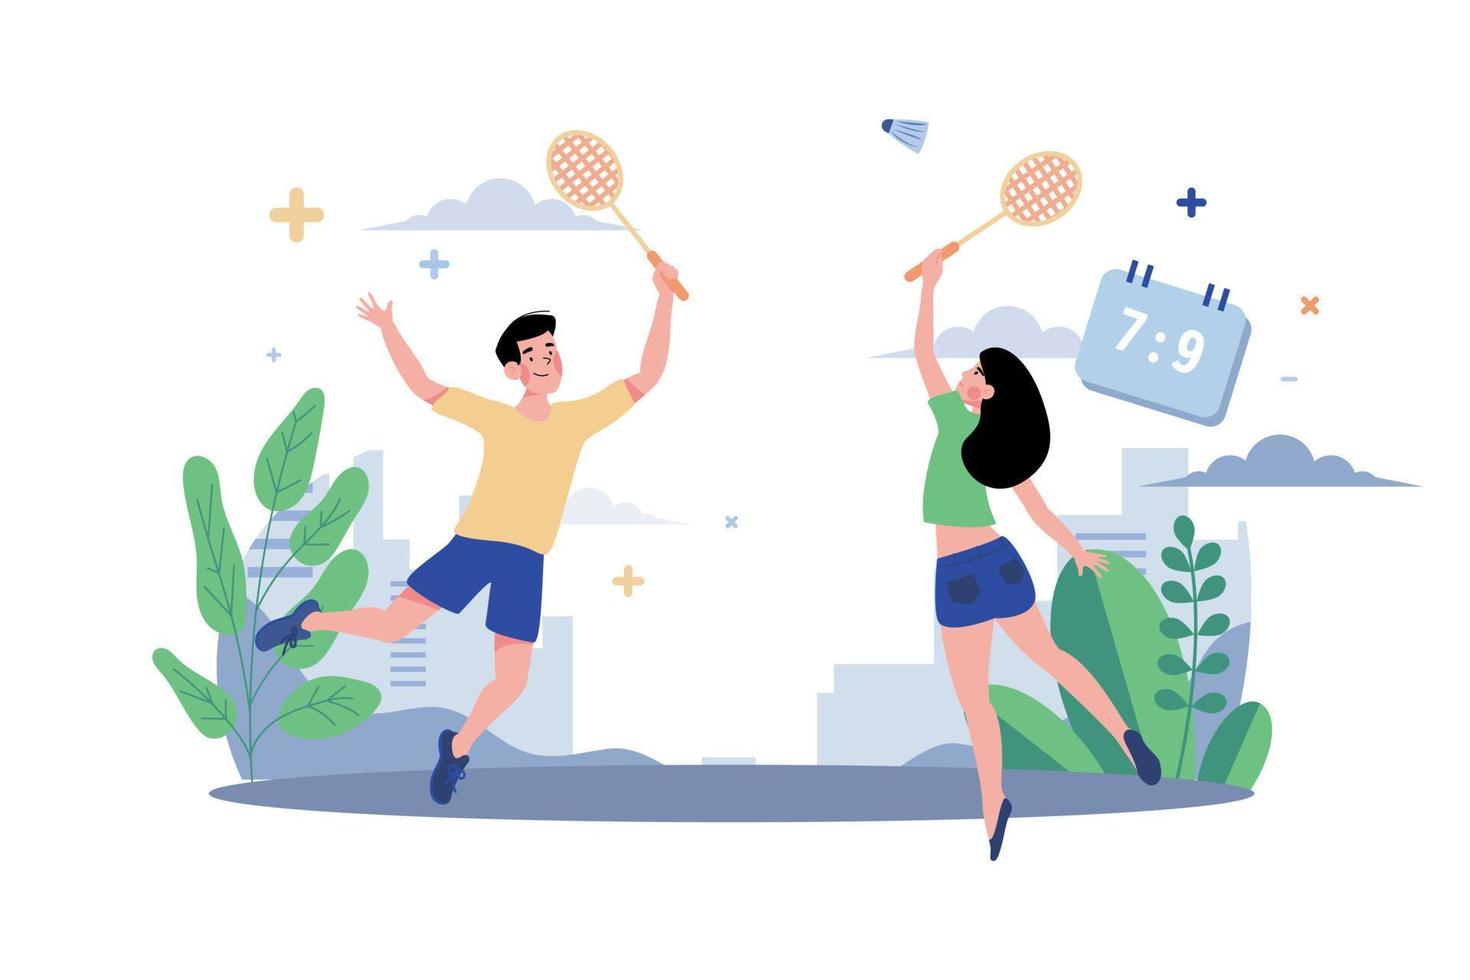 Couple Playing Badminton Illustration concept on white background vector